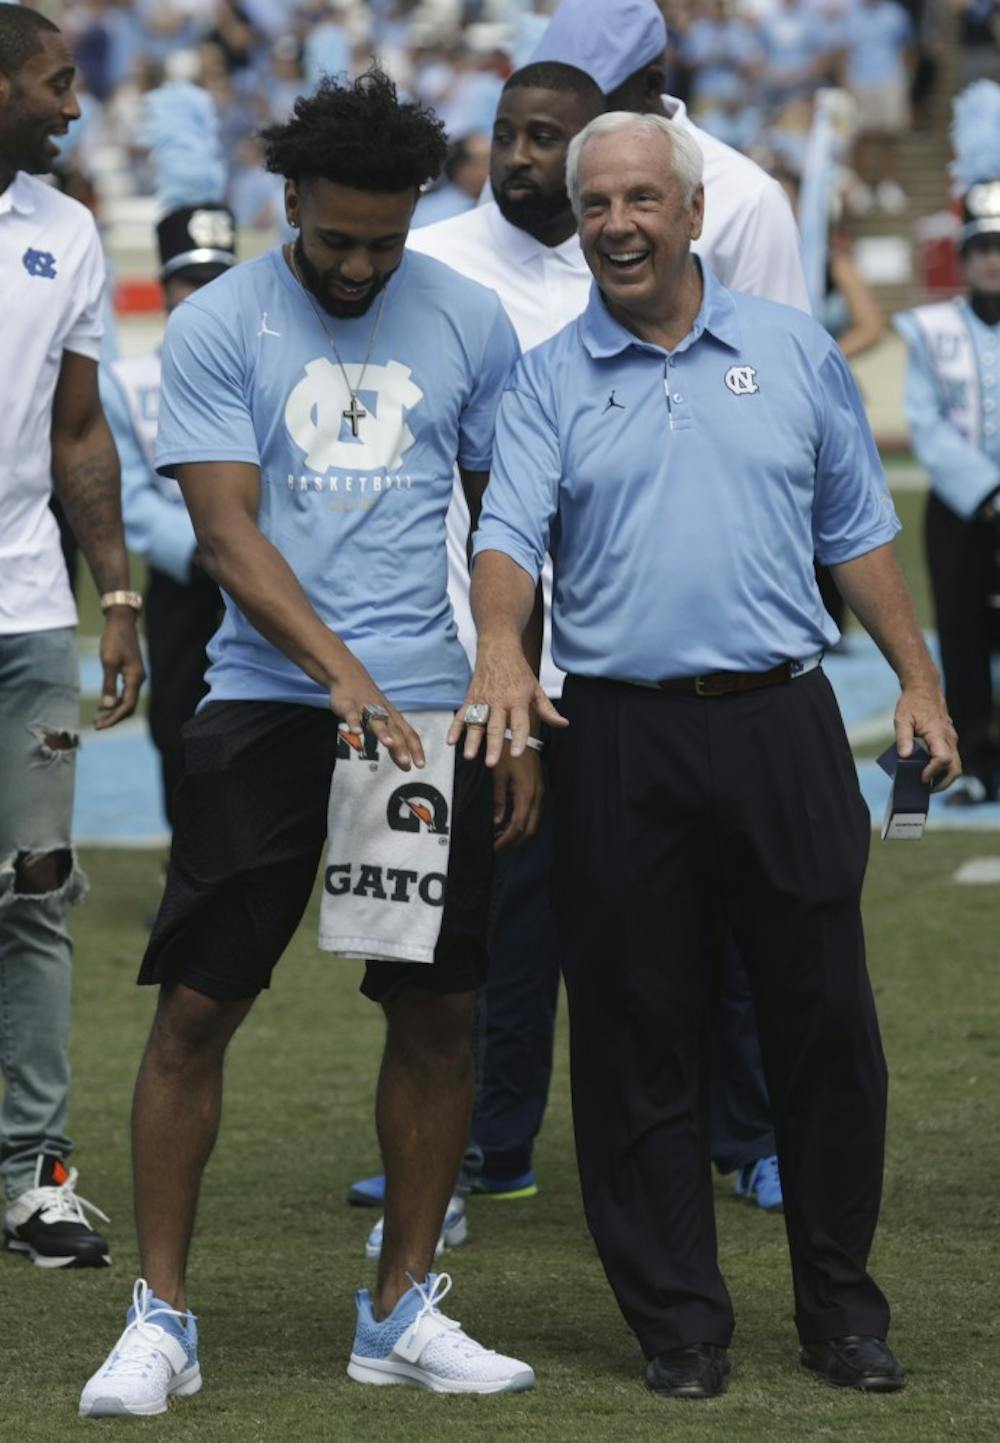 UNC senior point guard Joel Berry II (left) and UNC basketball head coach Roy Williams (right) show off their 2017 NCAA Men's Basketball championship rings during halftime of UNC's game against Louisville Saturday afternoon.&nbsp;